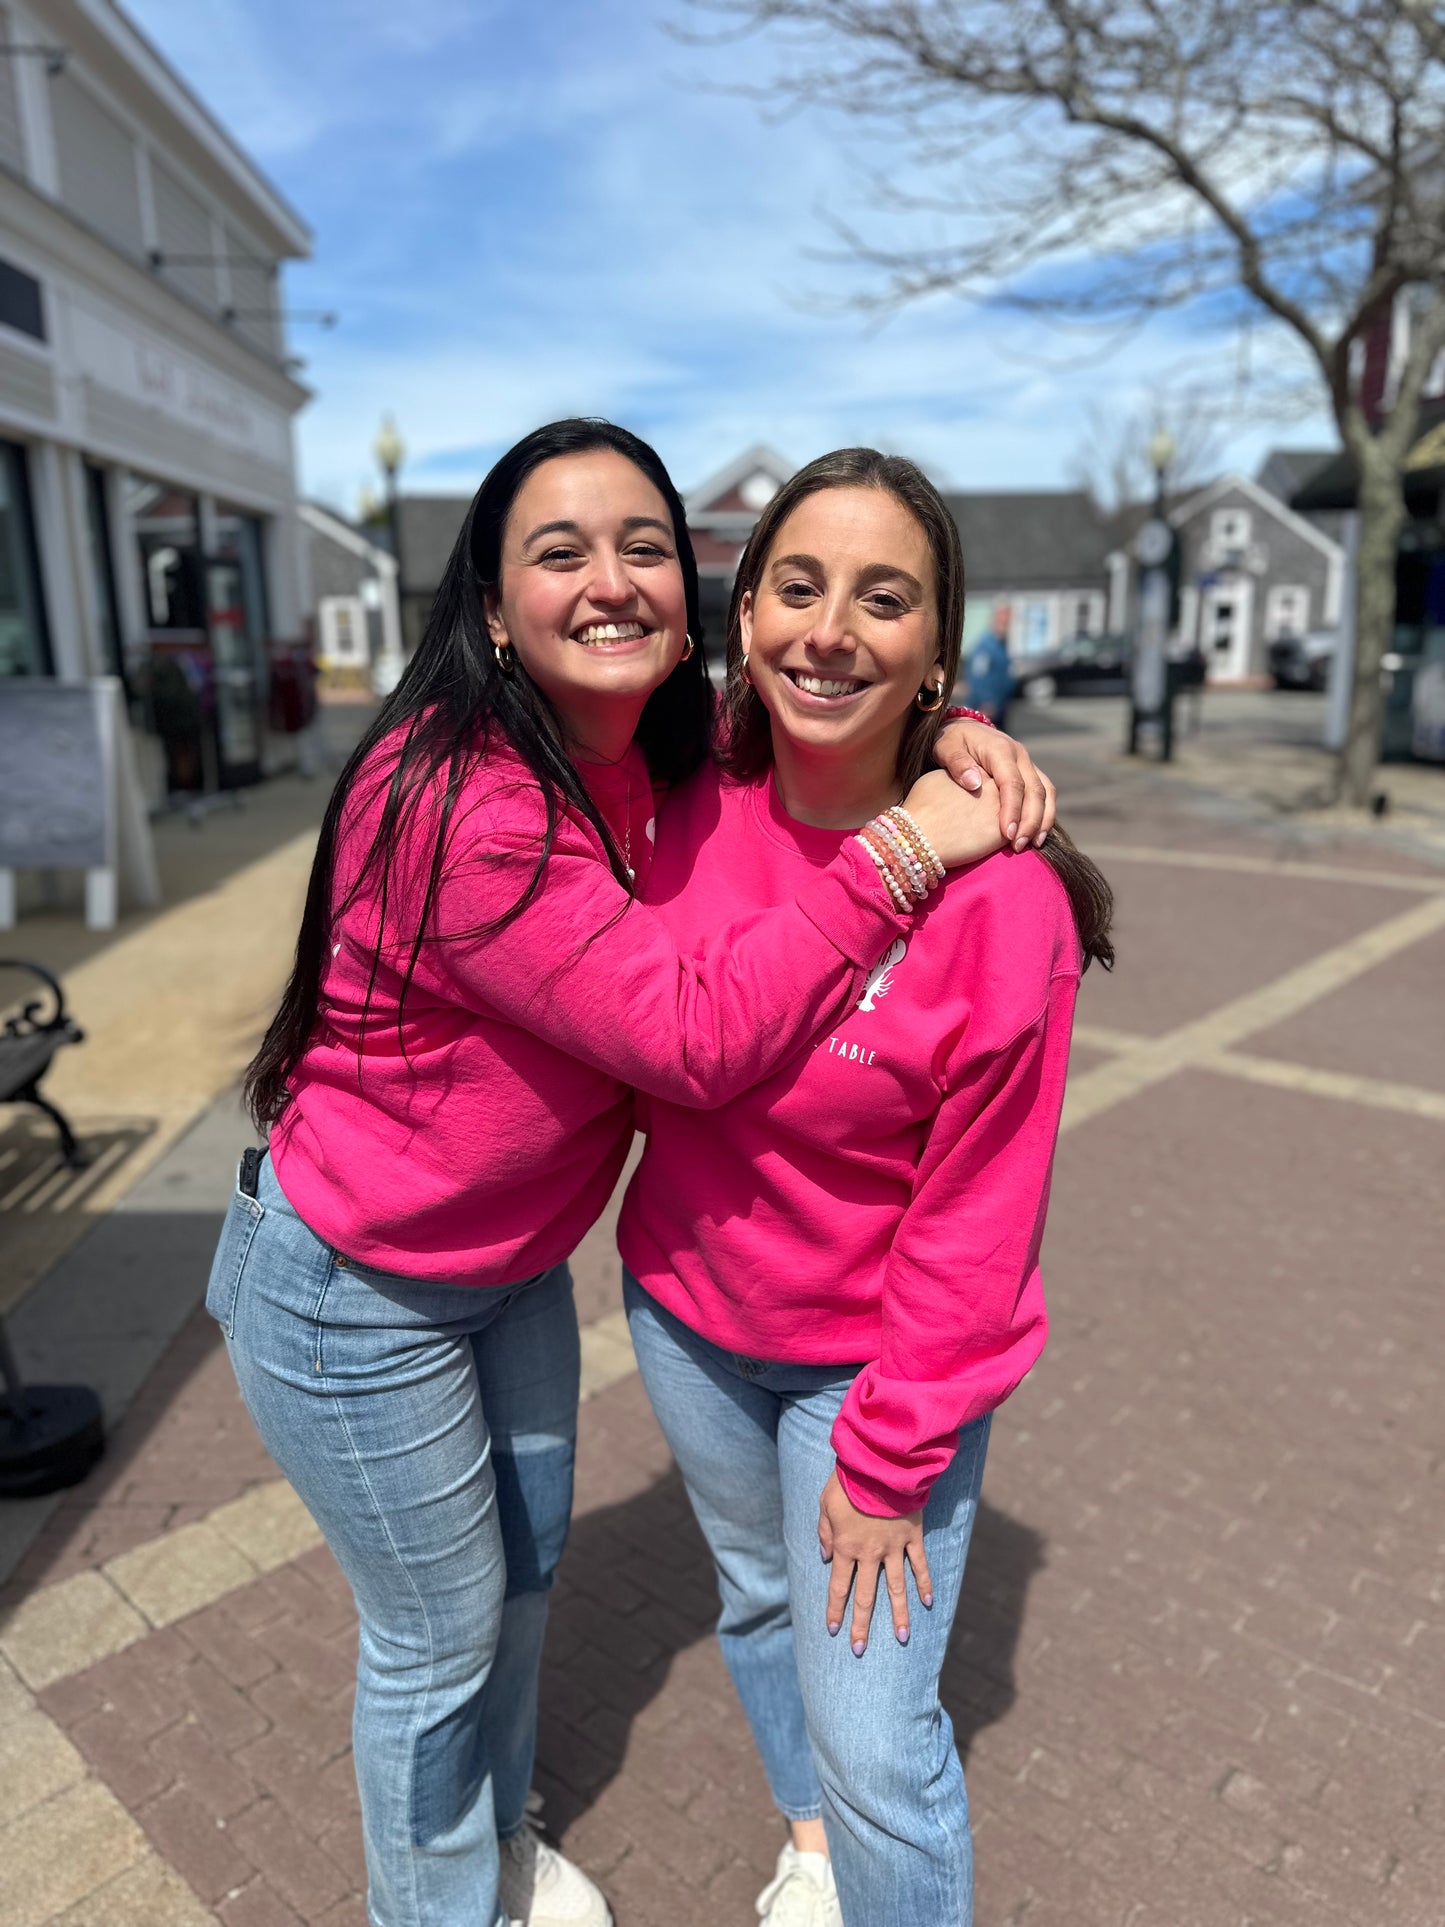 FROM THE CAPE TABLE SWEATSHIRT: HOT PINK